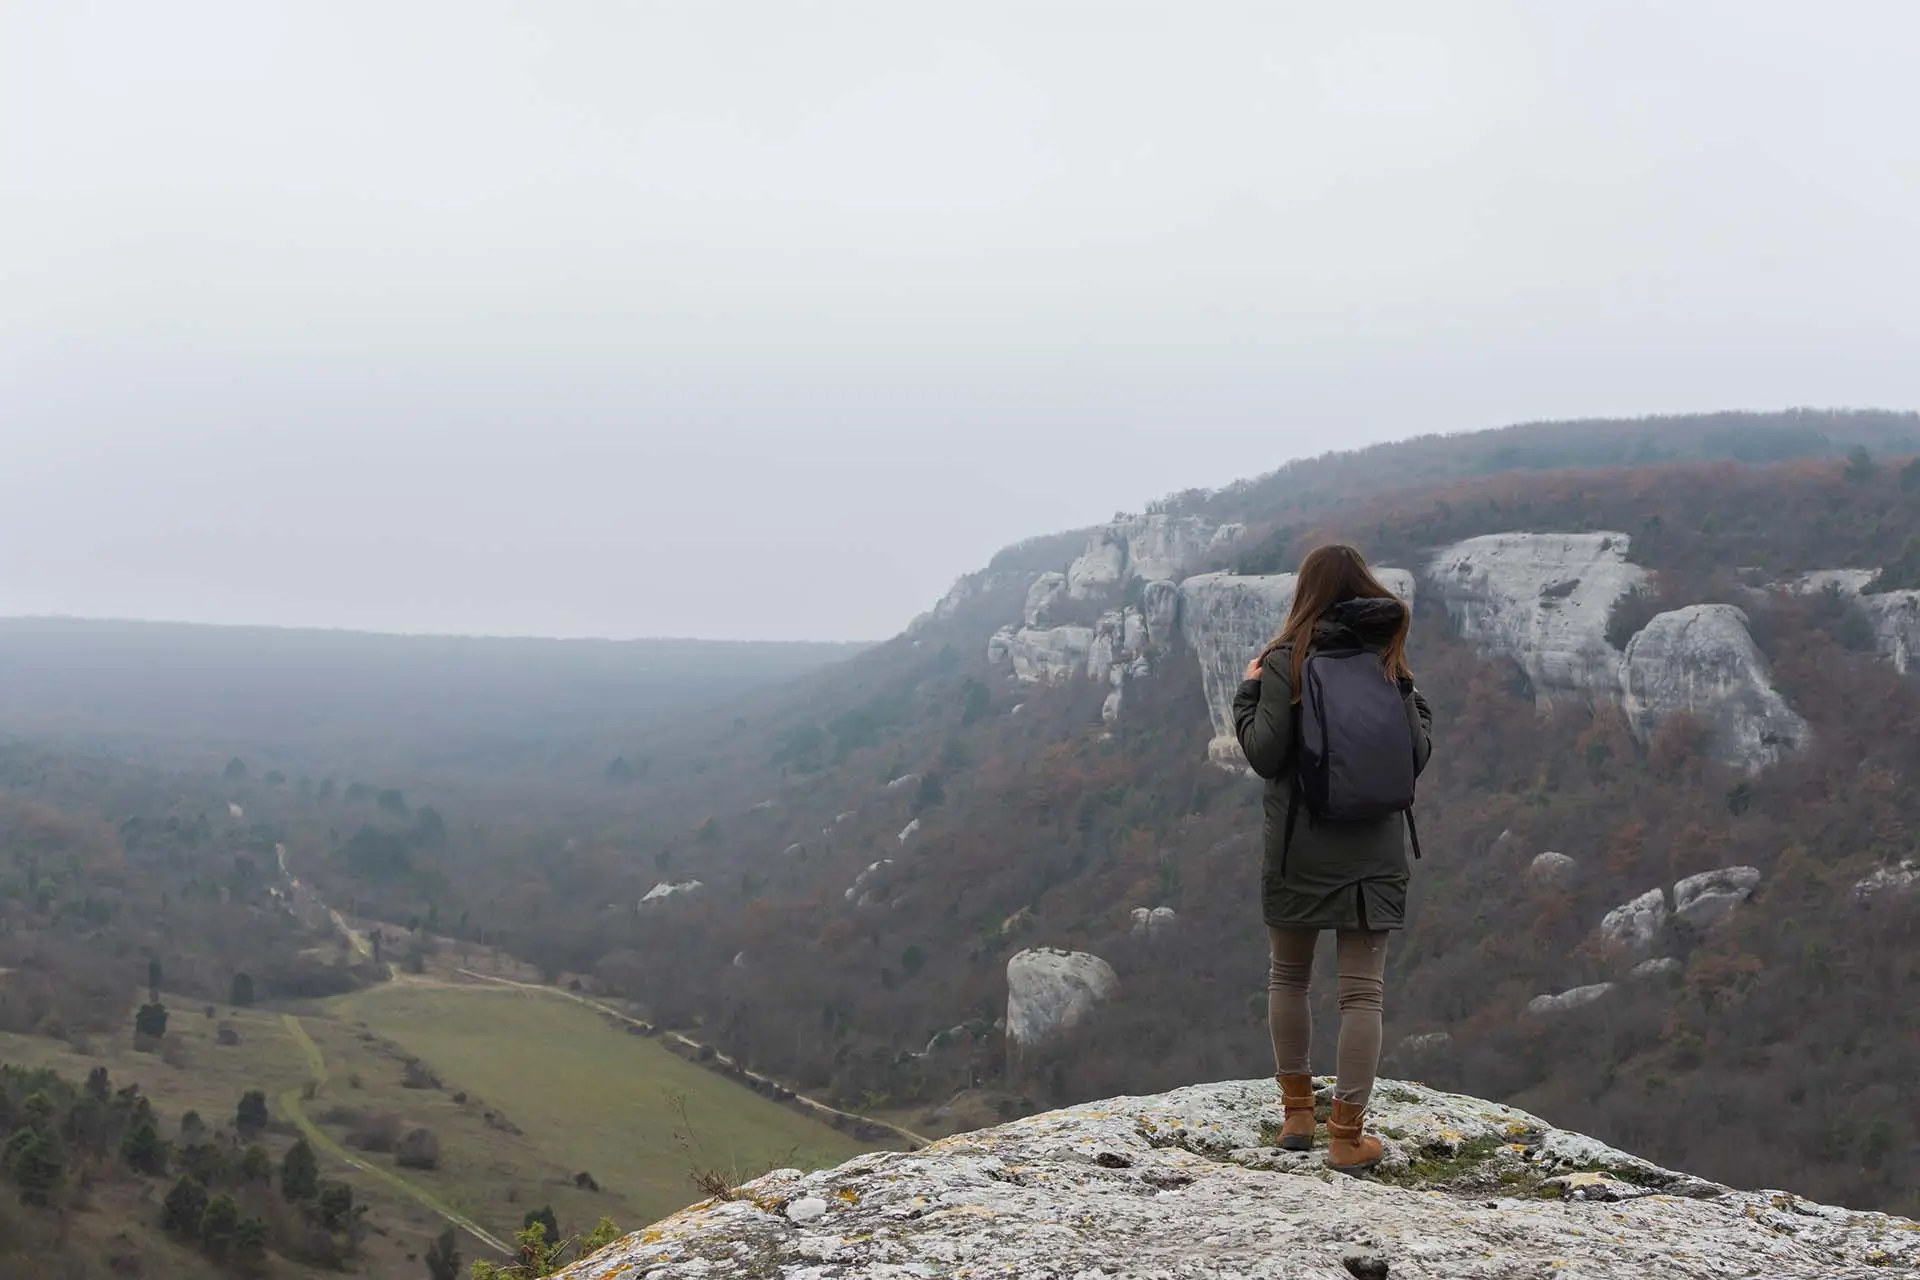 A thoughtful young woman stands on the edge of a precipice, gazing out over a vast landscape, contemplating her self-discovery for personal growth journey.